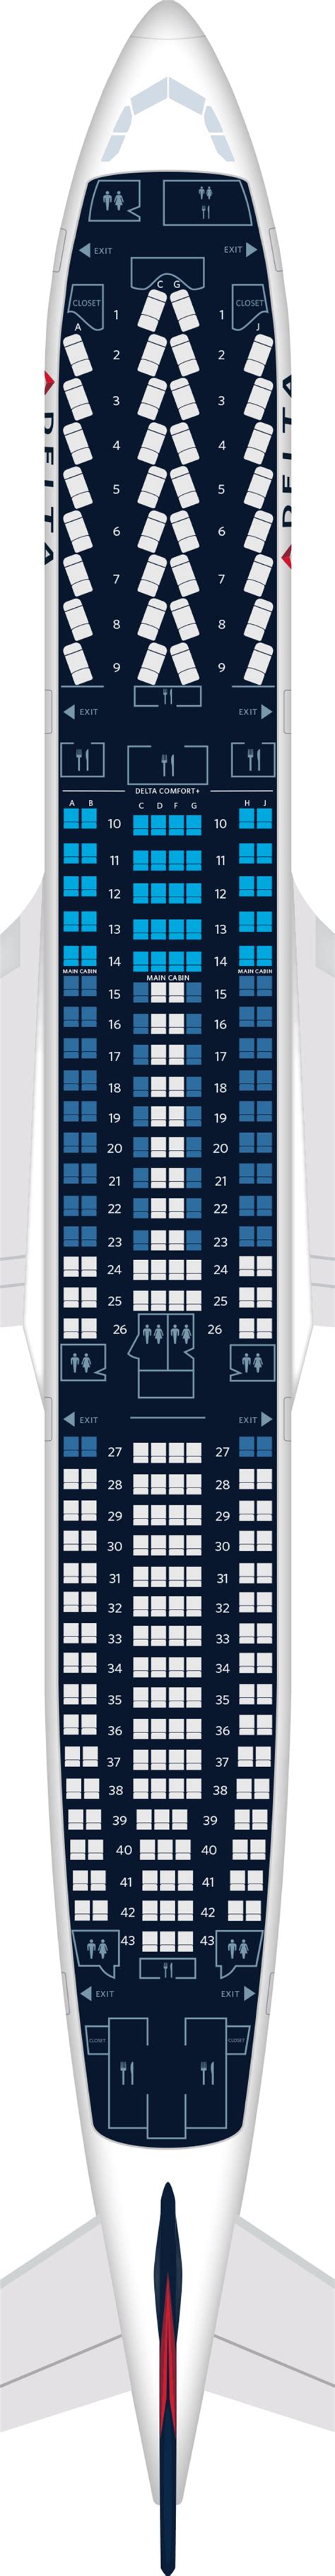 Delta Airbus A330 Jet Seating Chart